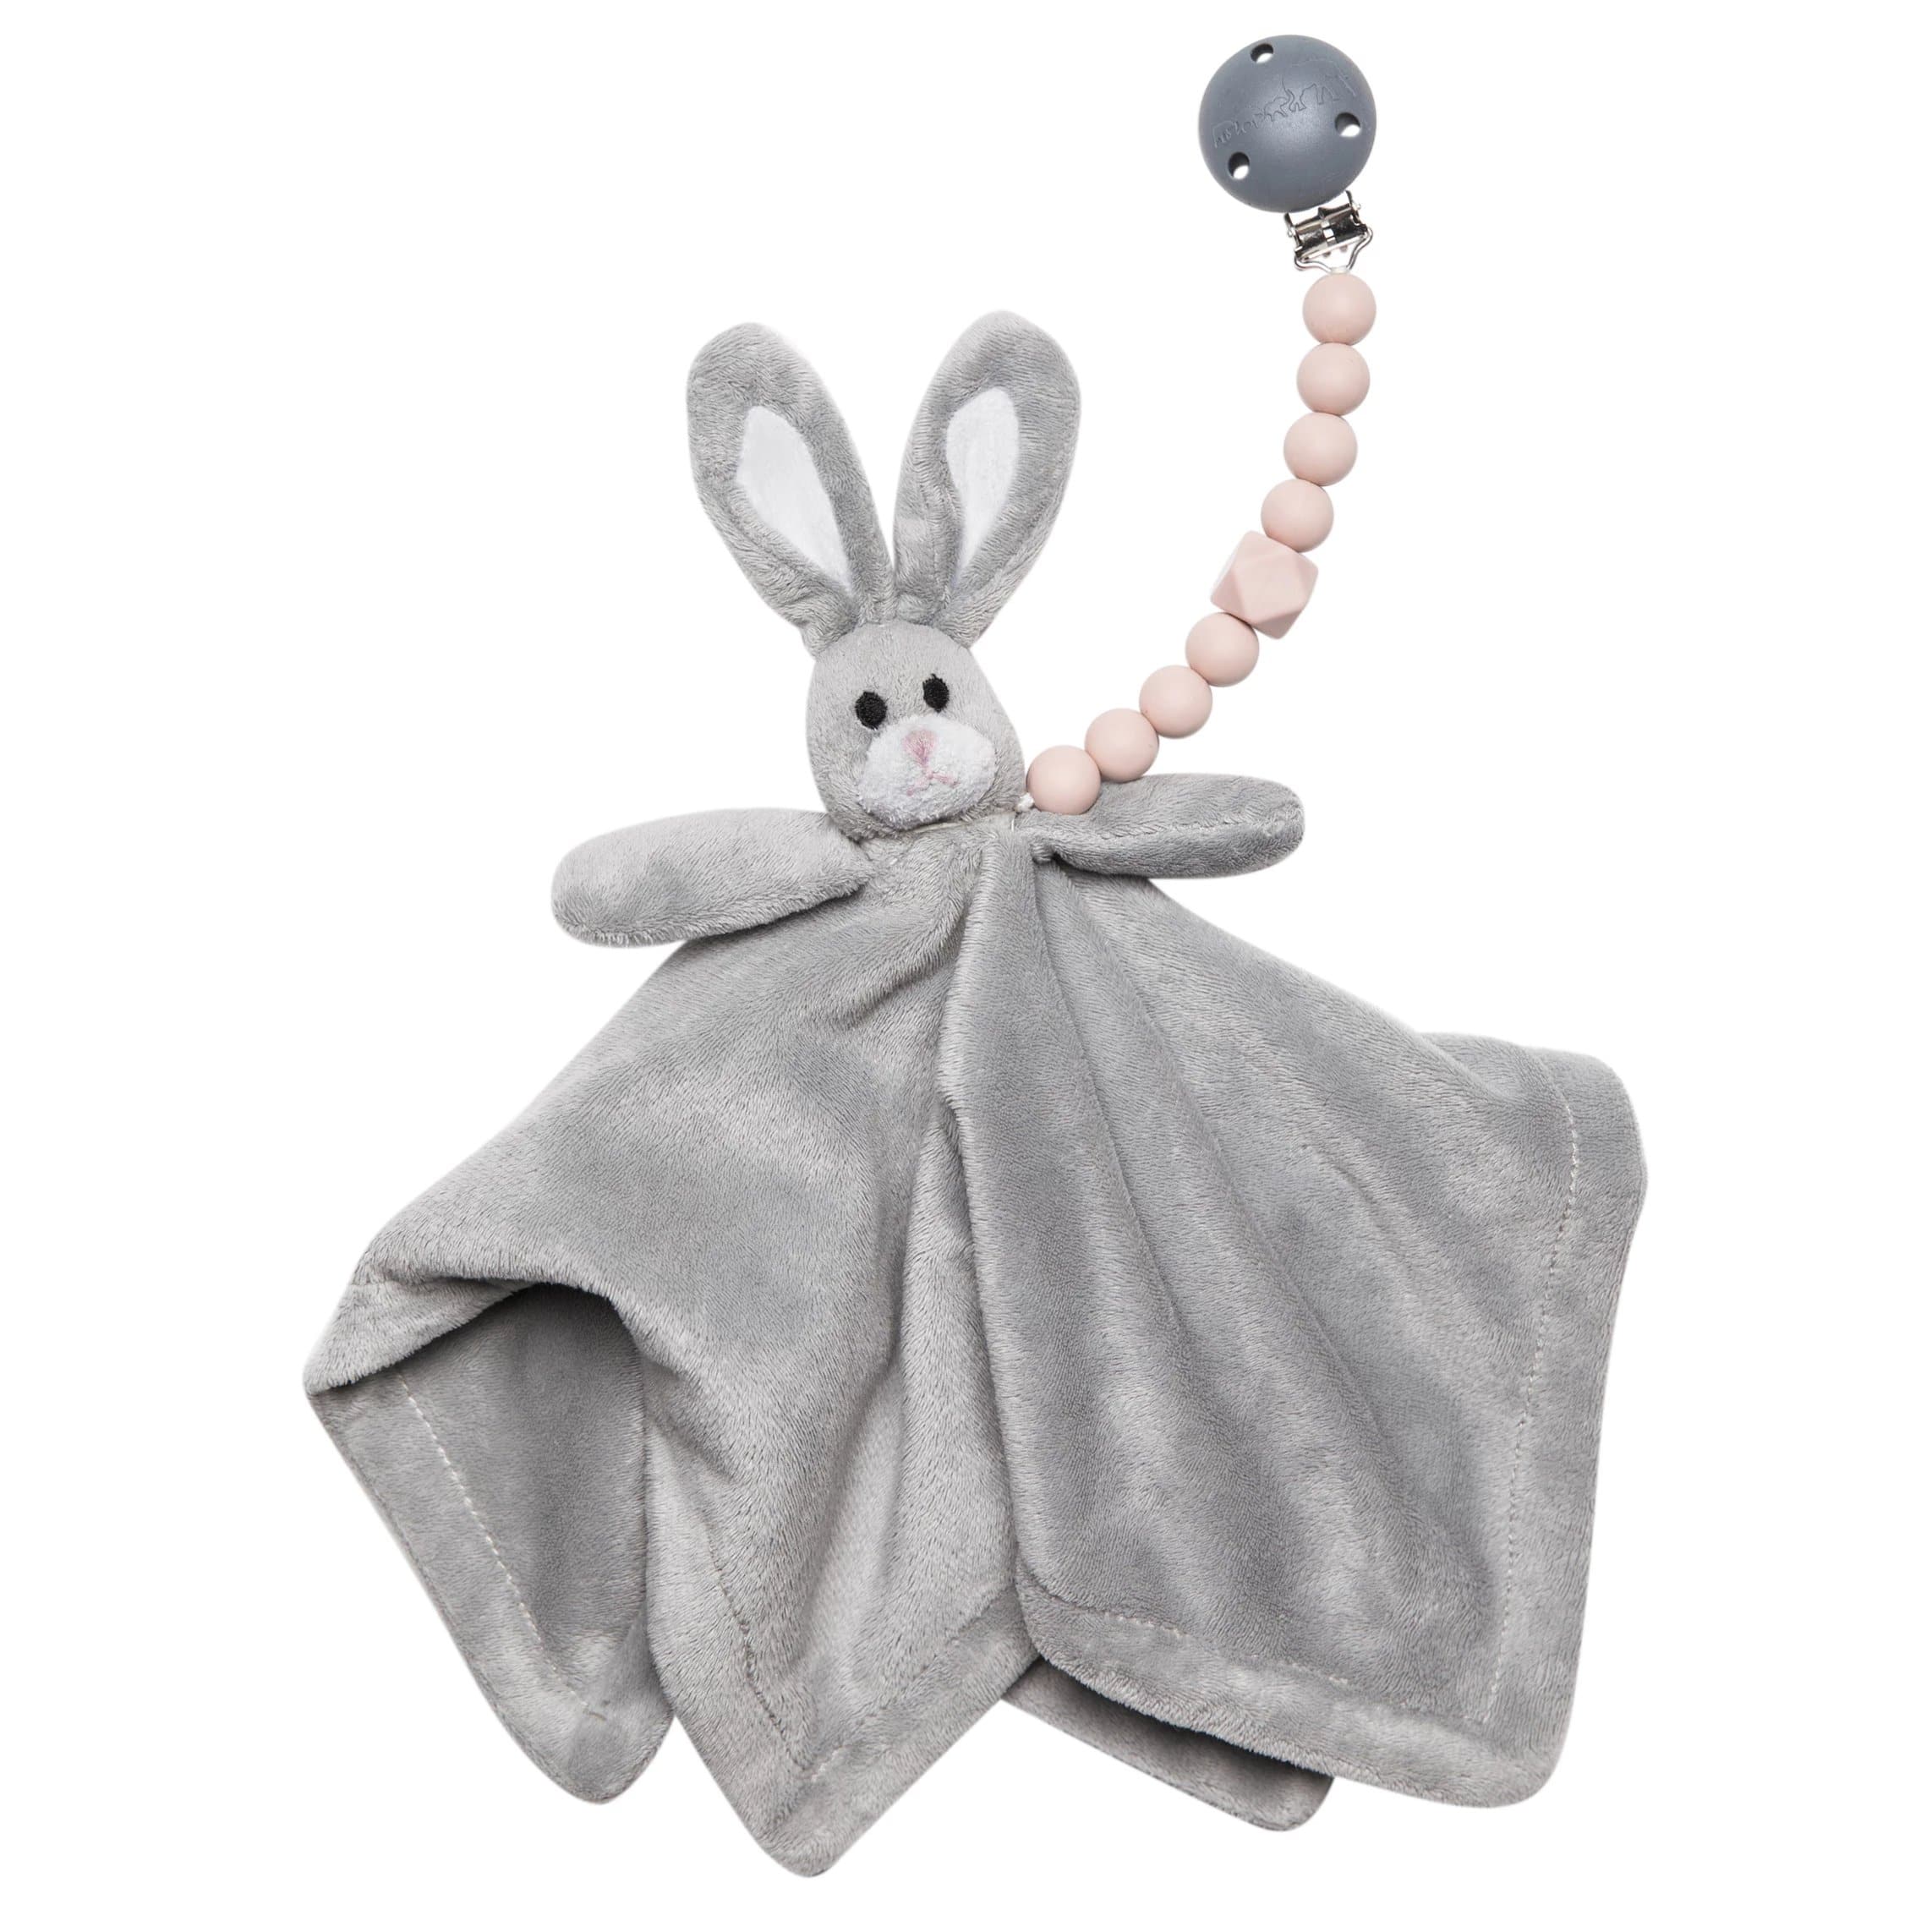 The Les Enfants Chewy Pacifier Clip pink attached to soft rabbit toy